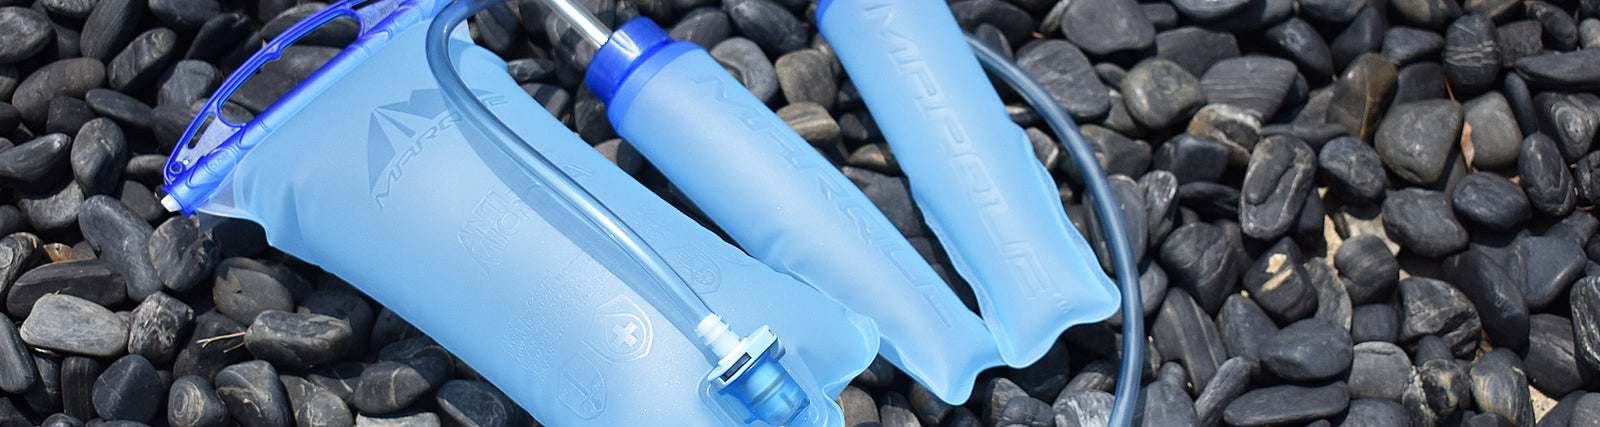 Hydration System | Bike Parts and Accessories Marque Cycling - hydration  bladder